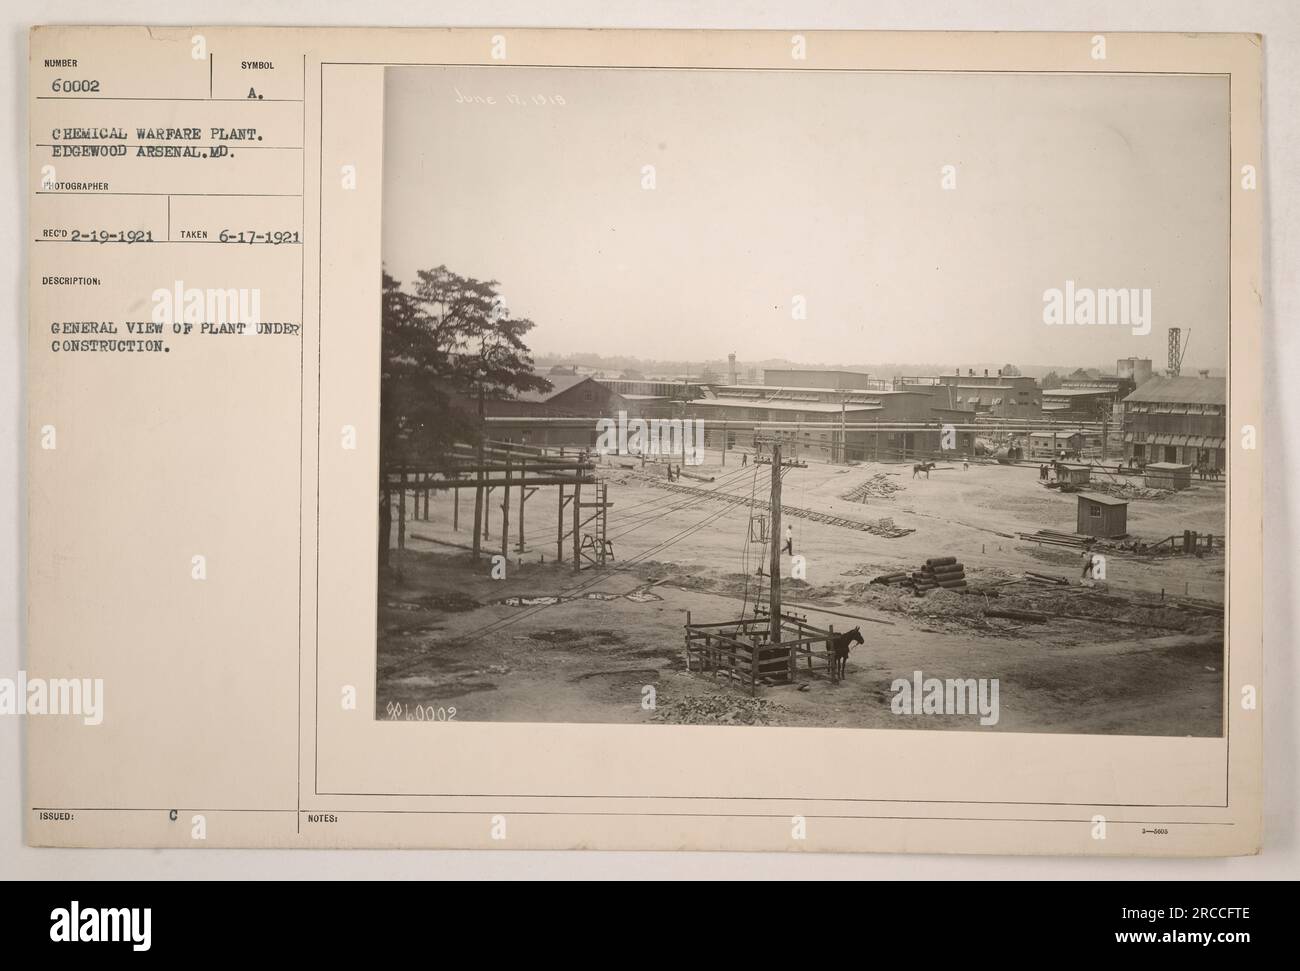 General view of the SE 60002 chemical warfare plant under construction at Edgewood Arsenal, MD. The photograph, taken on June 17, 1921, depicts the progress of the plant's construction. It was captured by photographer A. Reco and the description notes its issuance as note 901.0002. Stock Photo